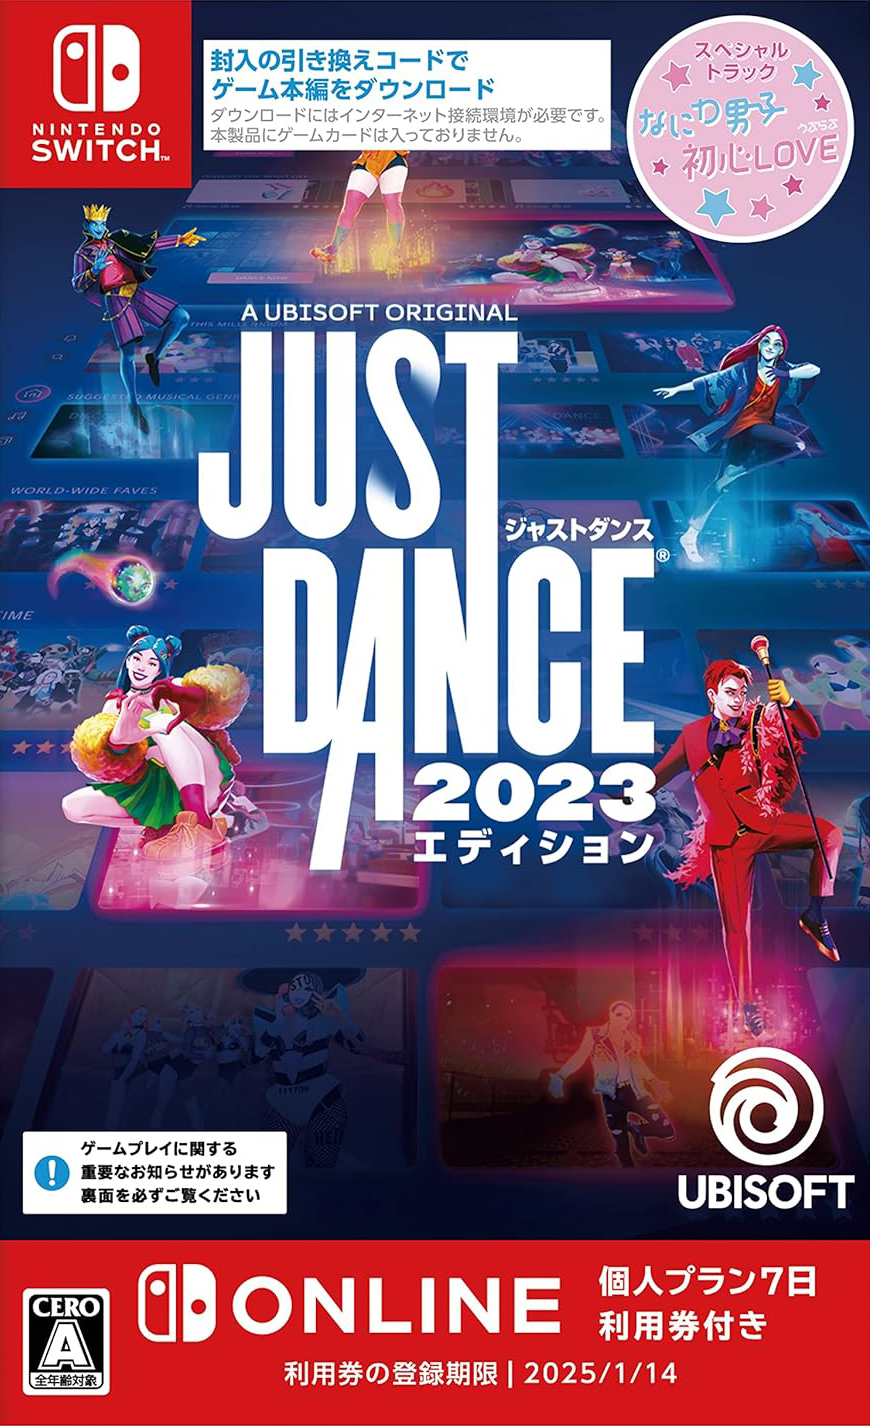 Just Dance 2023 Edition Box Shot for PlayStation 5 - GameFAQs